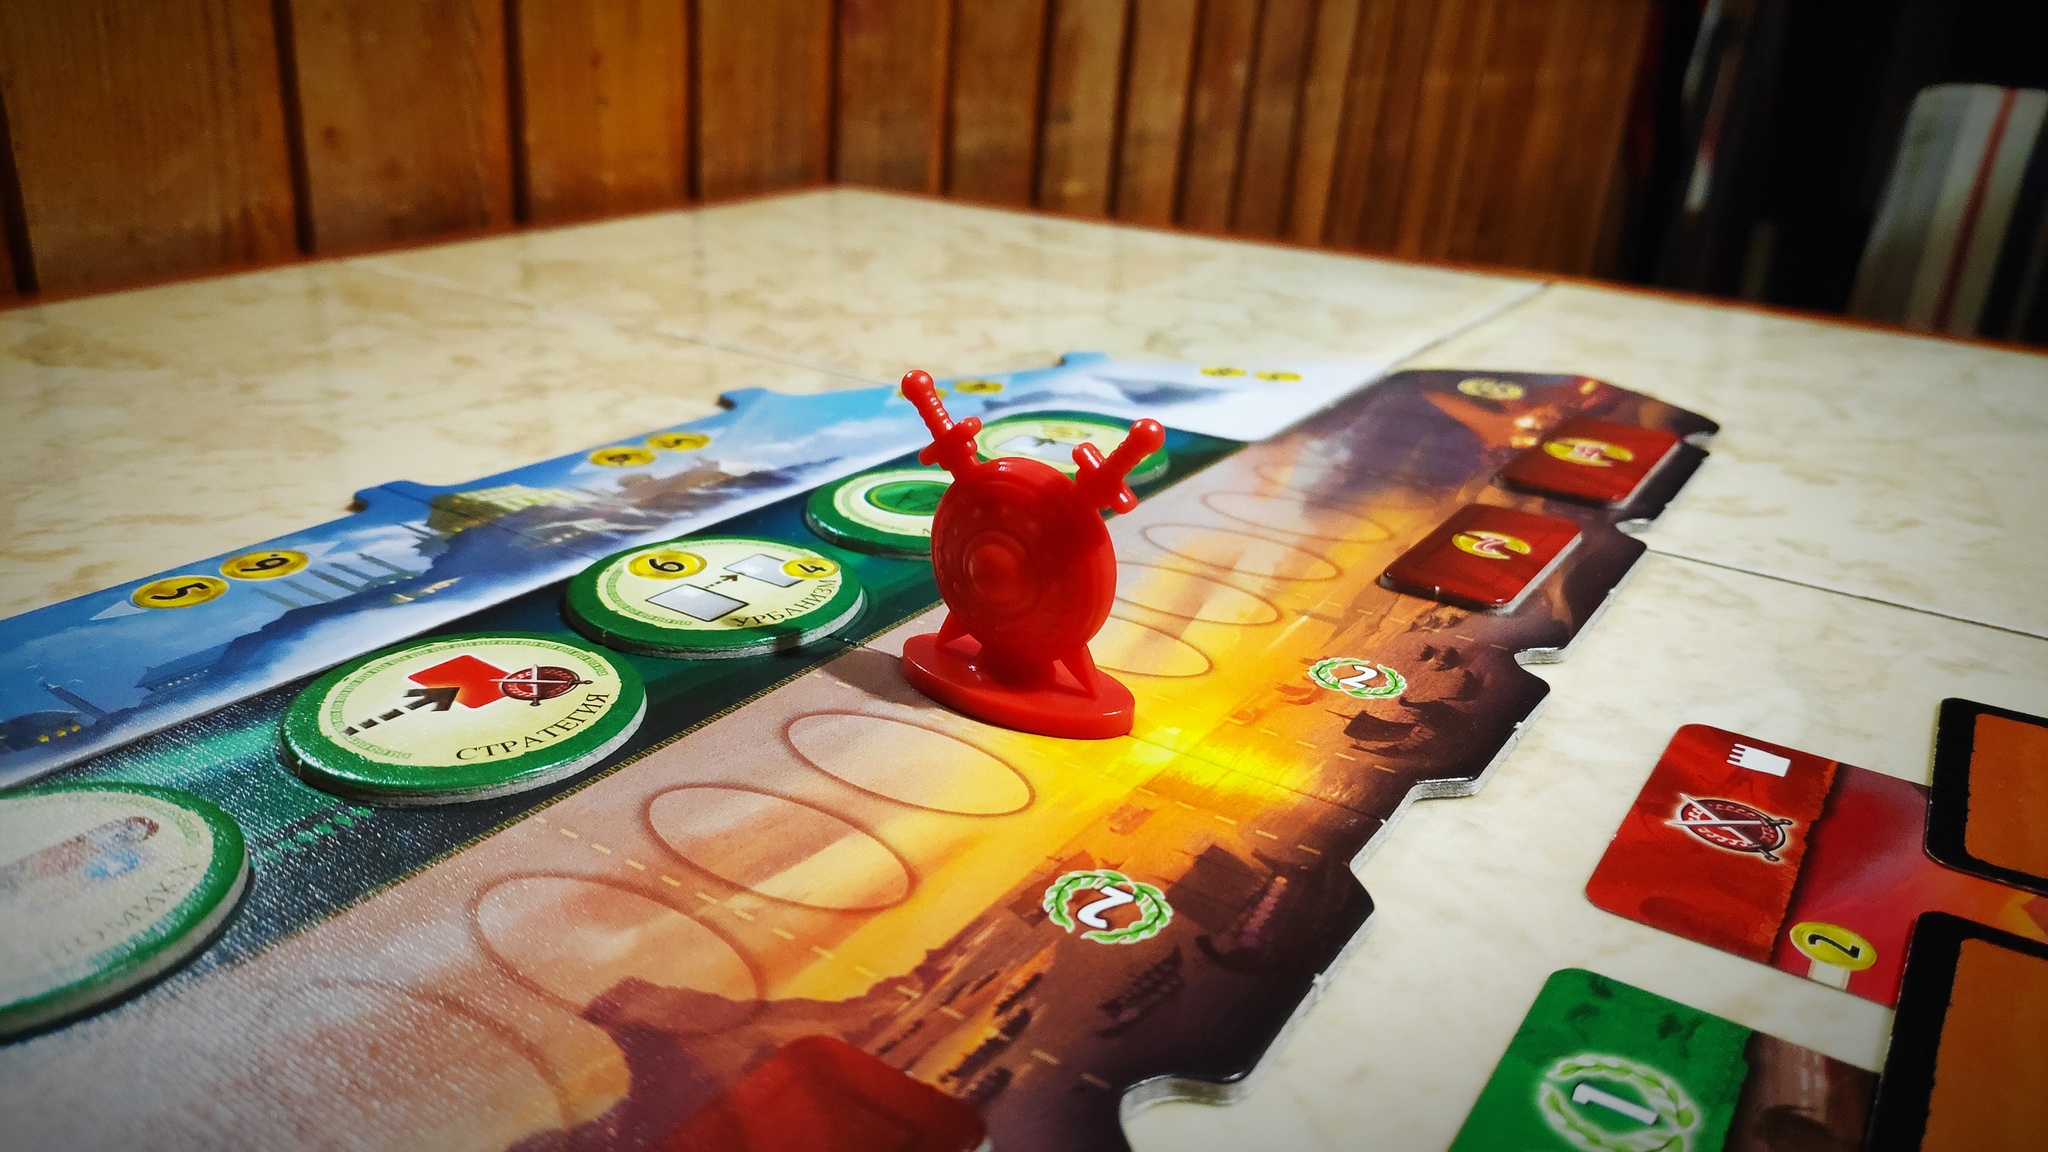 Antique confrontation. 7 Wonders: Duel + Addition Pantheon. - My, Longpost, Board Game Overview, League of Board Players, Board games, , Seven Wonders of the World